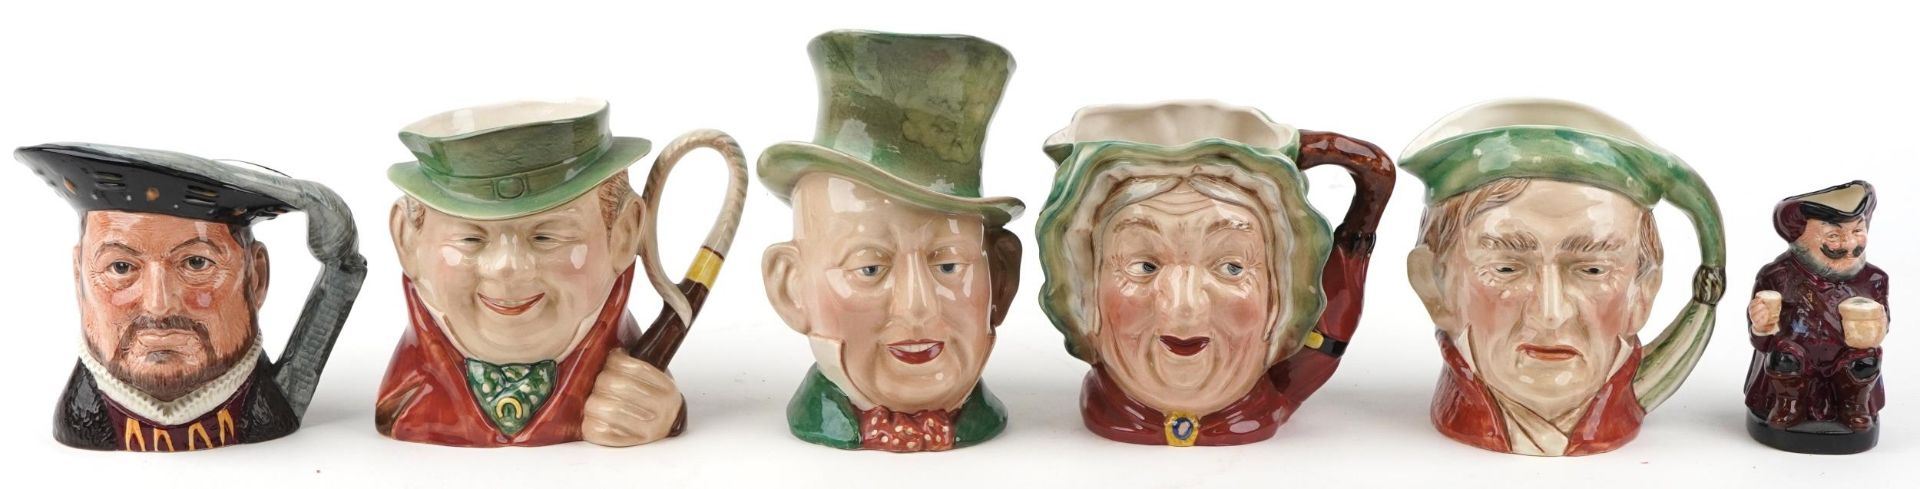 Six Beswick and Doulton character jugs including Scrooge and Henry VIII, the largest 23cm high - Image 2 of 5